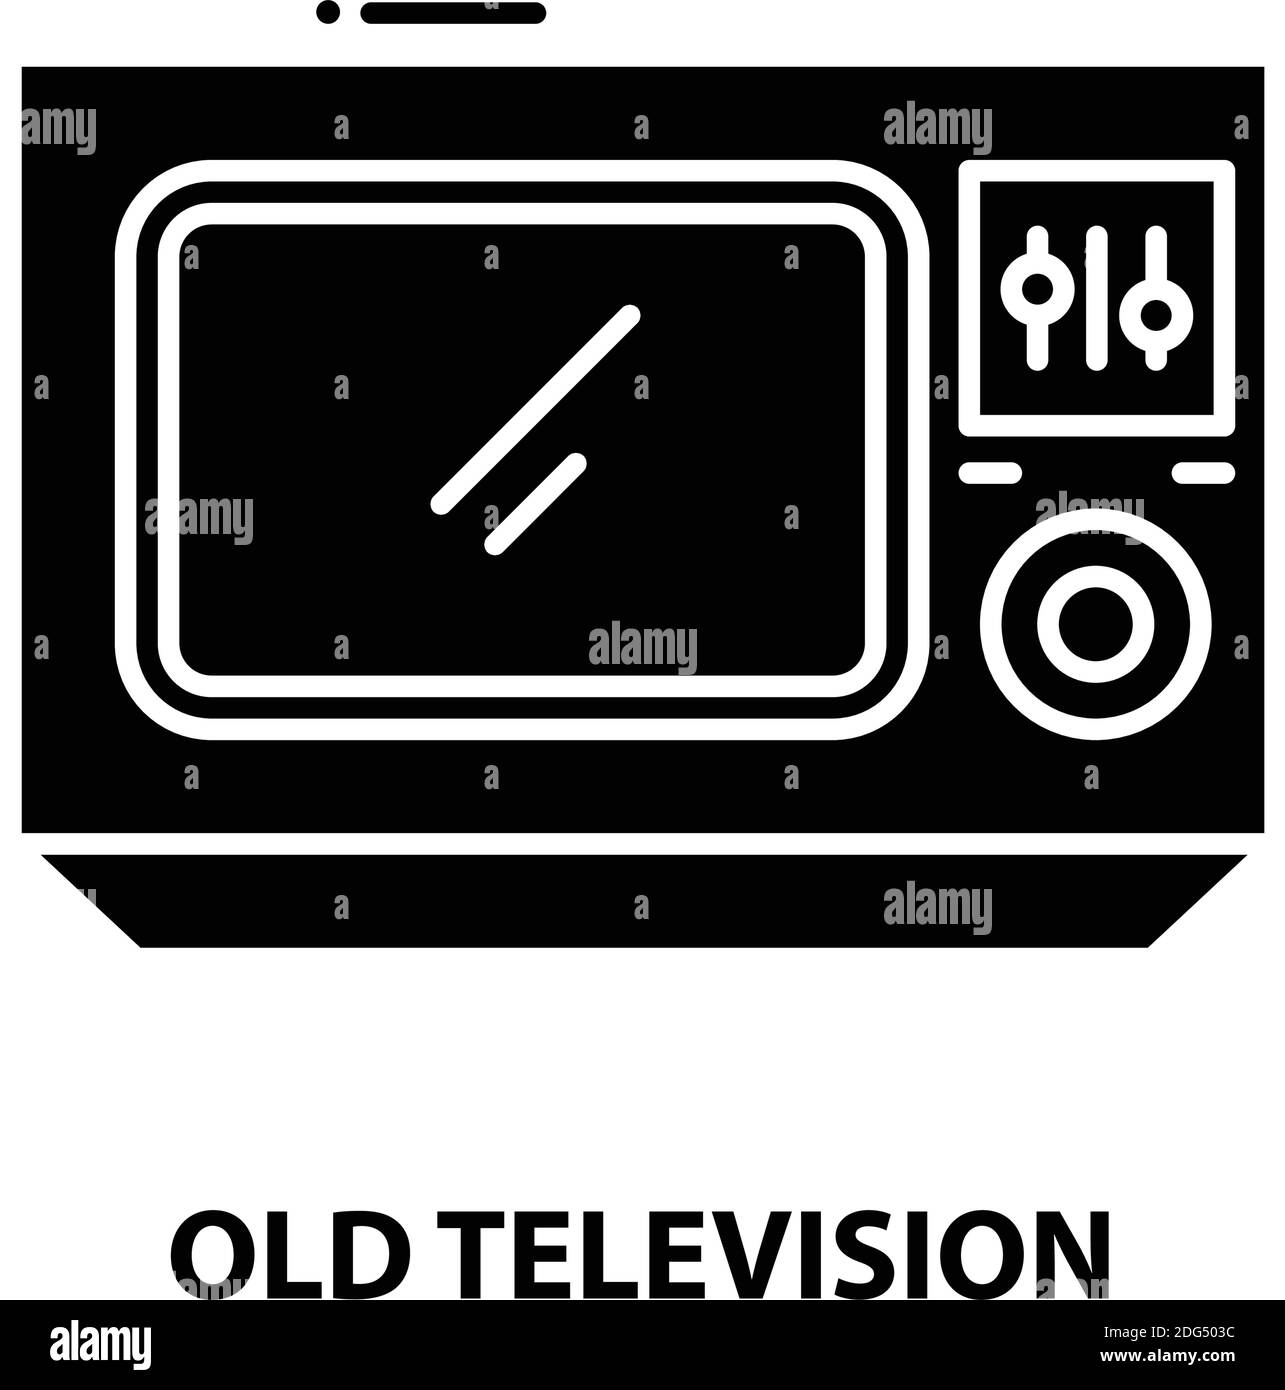 old television icon, black vector sign with editable strokes, concept illustration Stock Vector